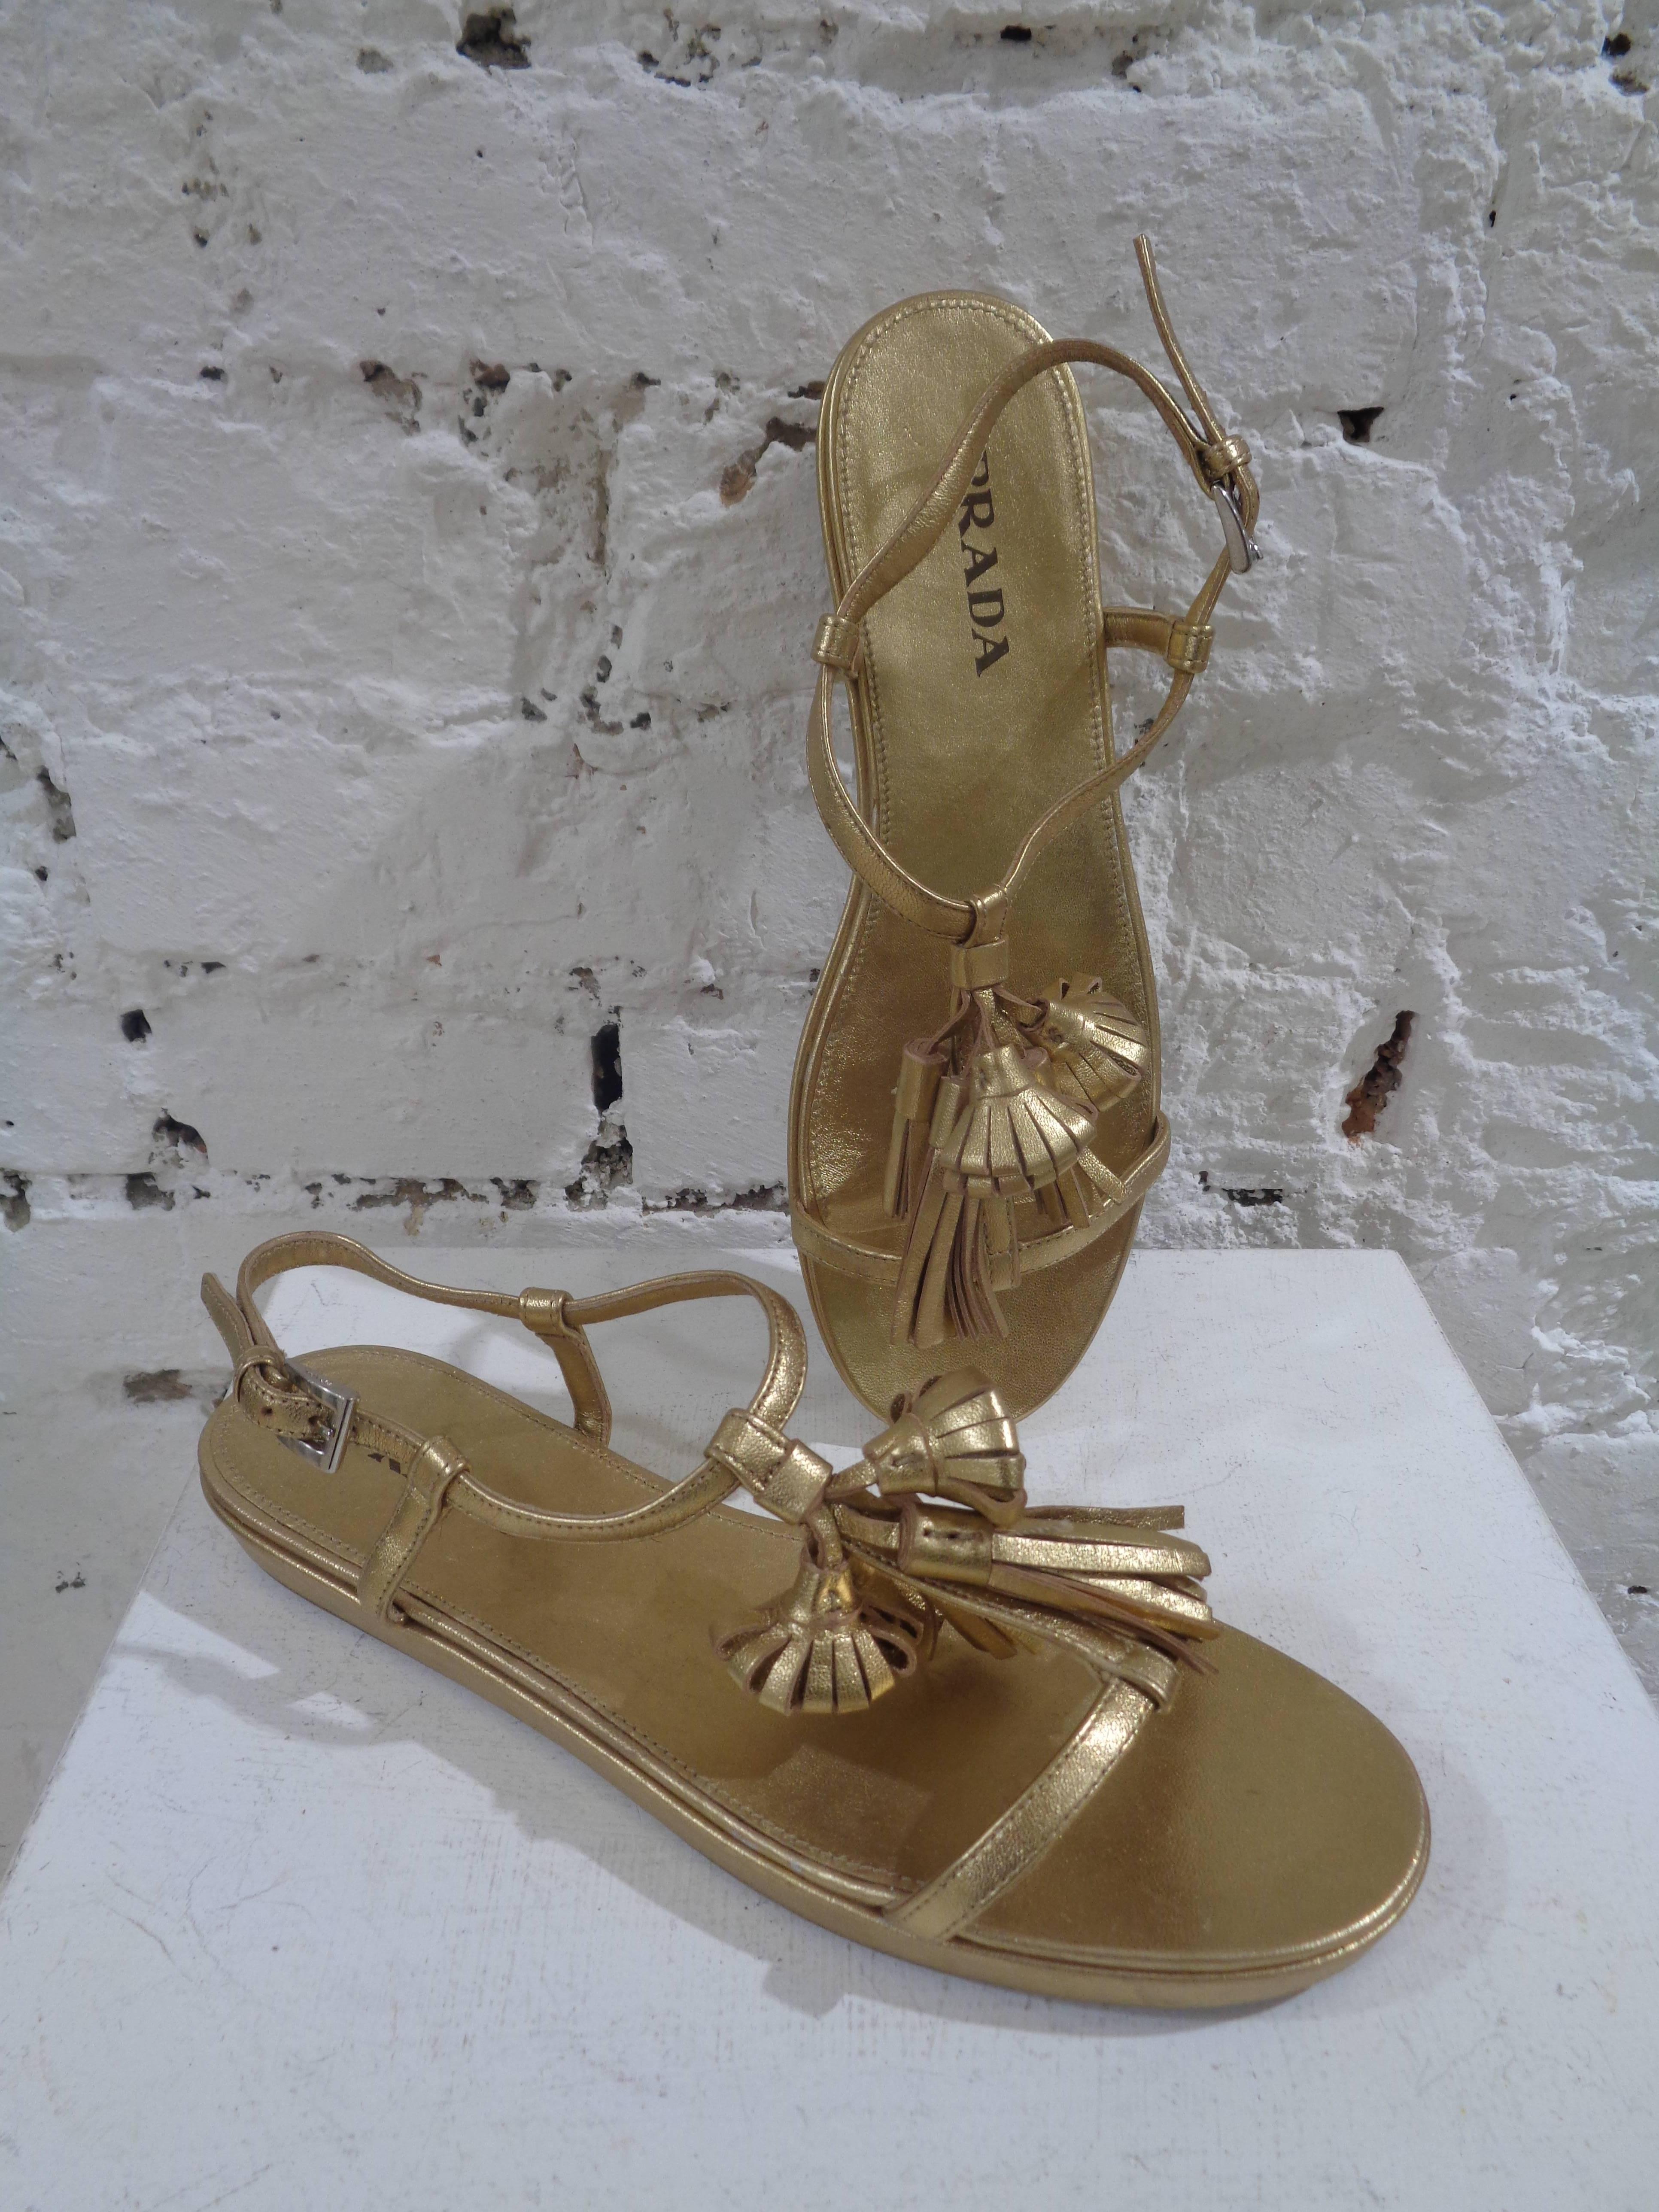 Prada gold leather sandals

unworn gold tone leather Prada shoes in size 36 and totally made in italy